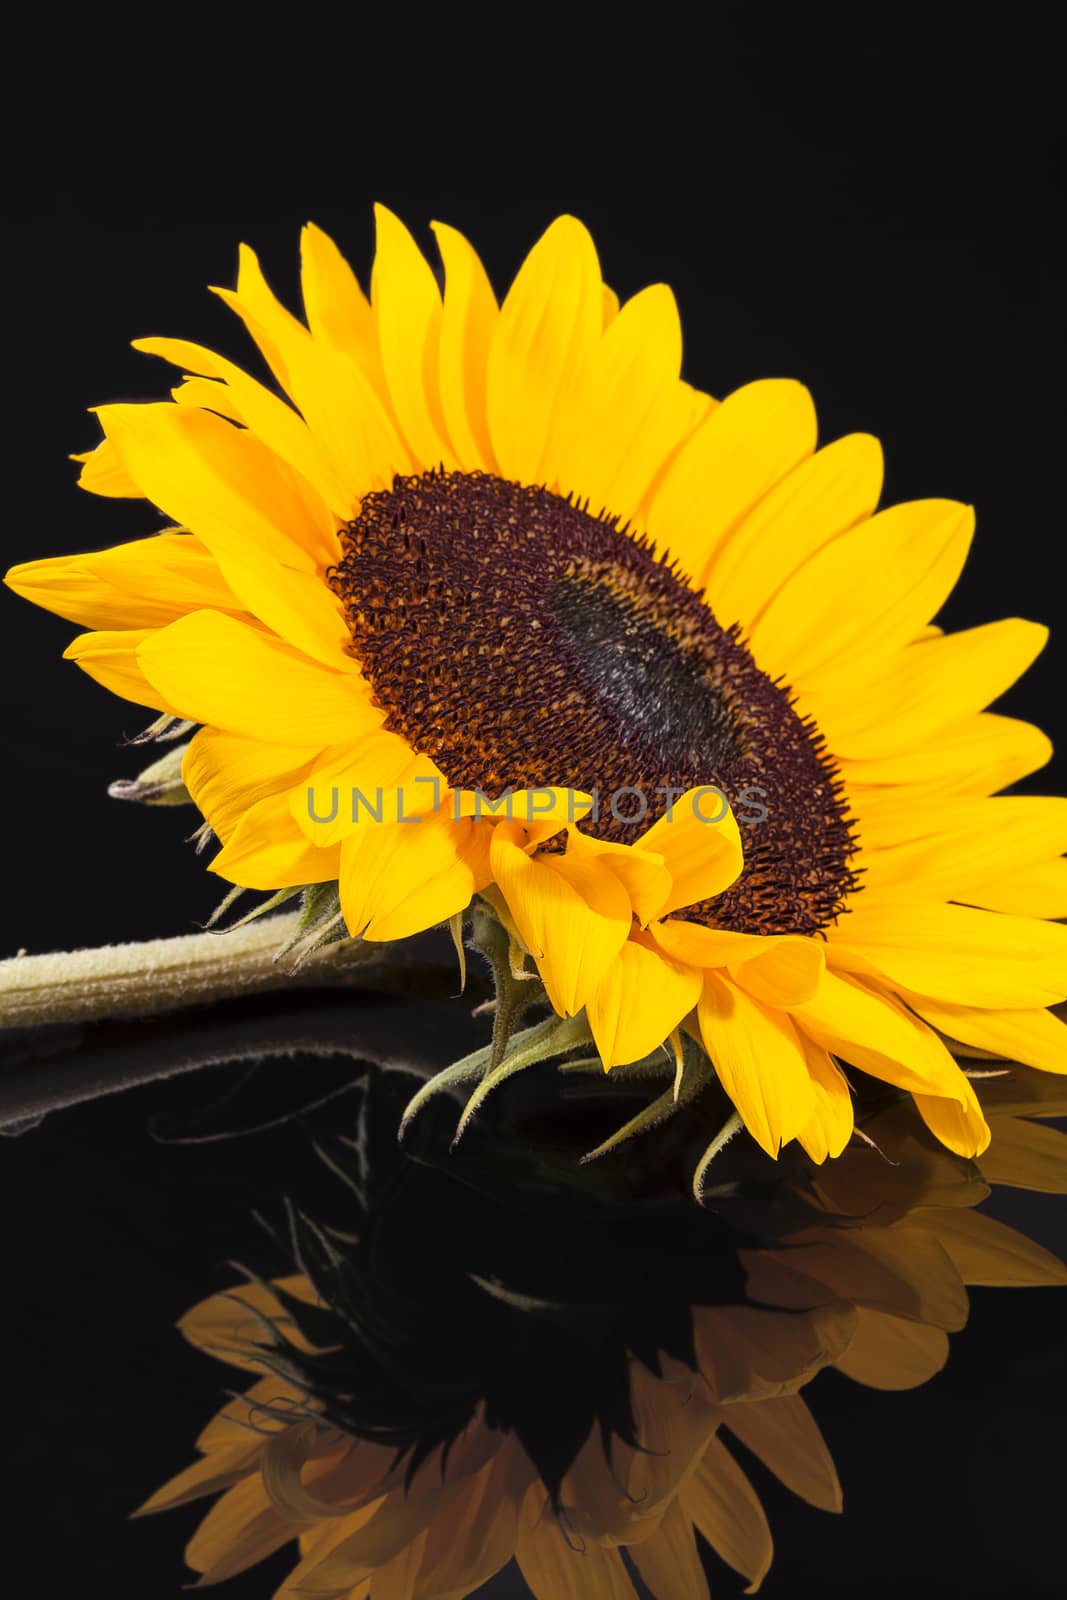 Blooming sunflower on black  background with reflection by mychadre77